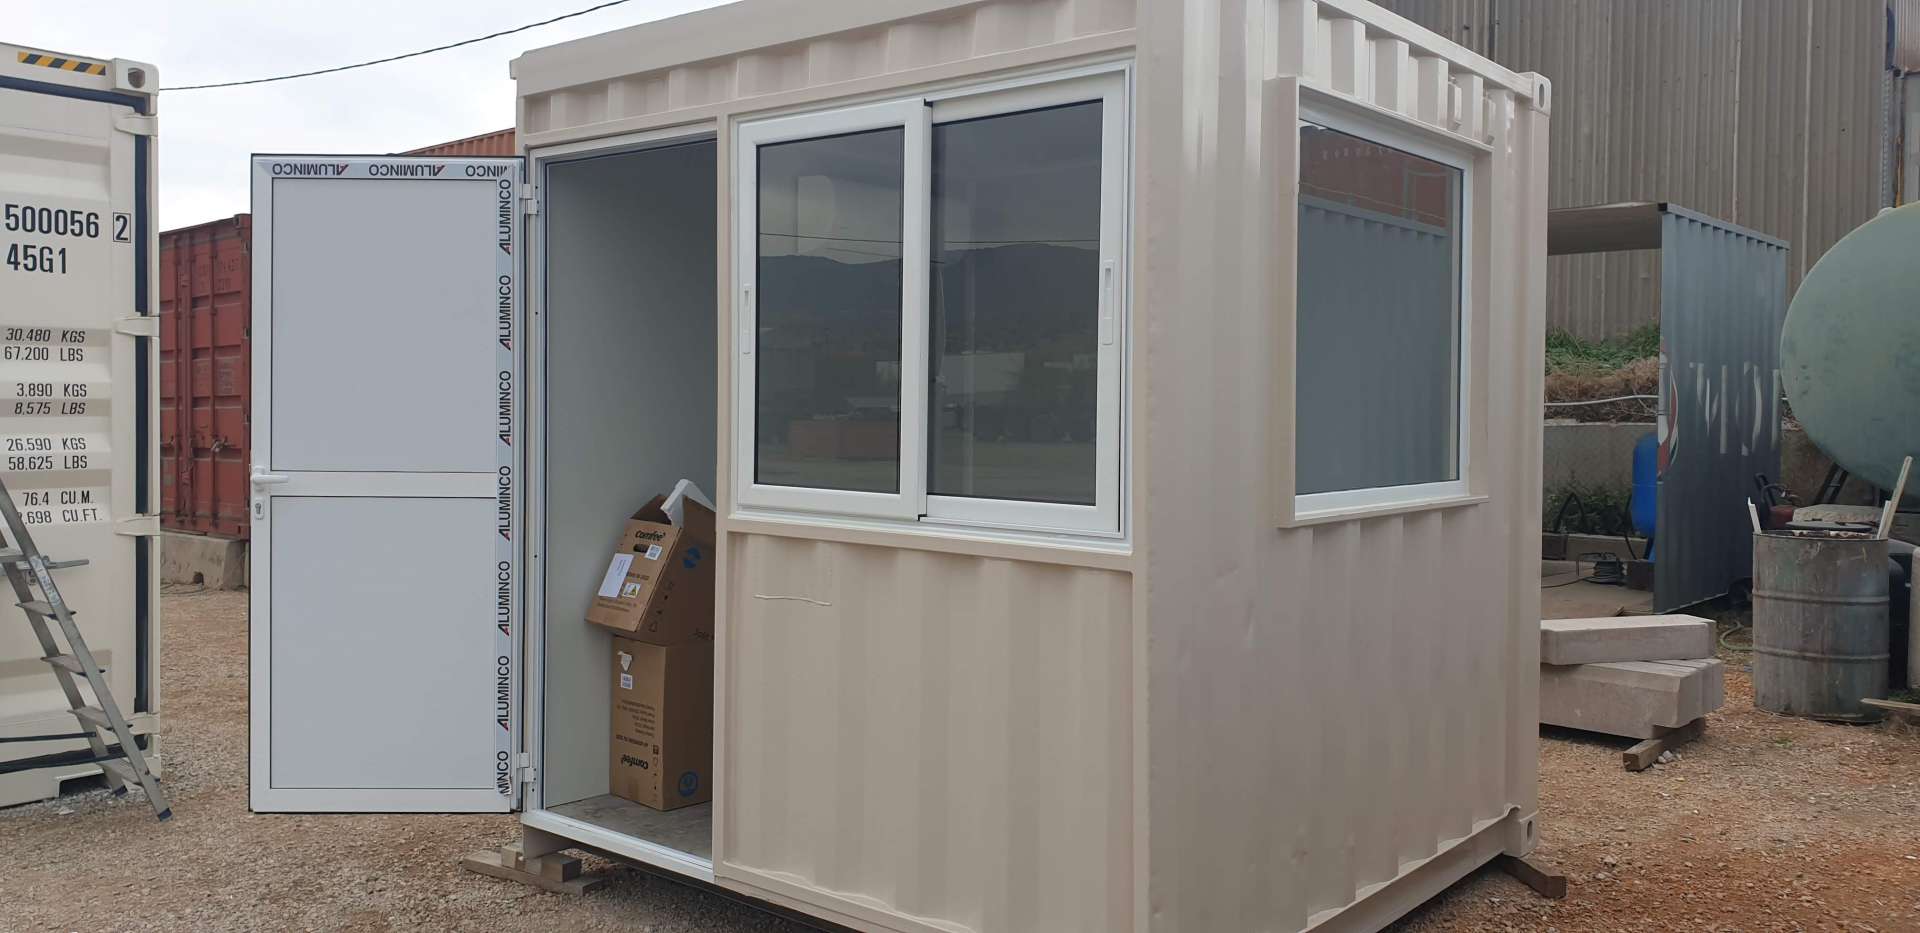 creating a guardhouse from shipping container